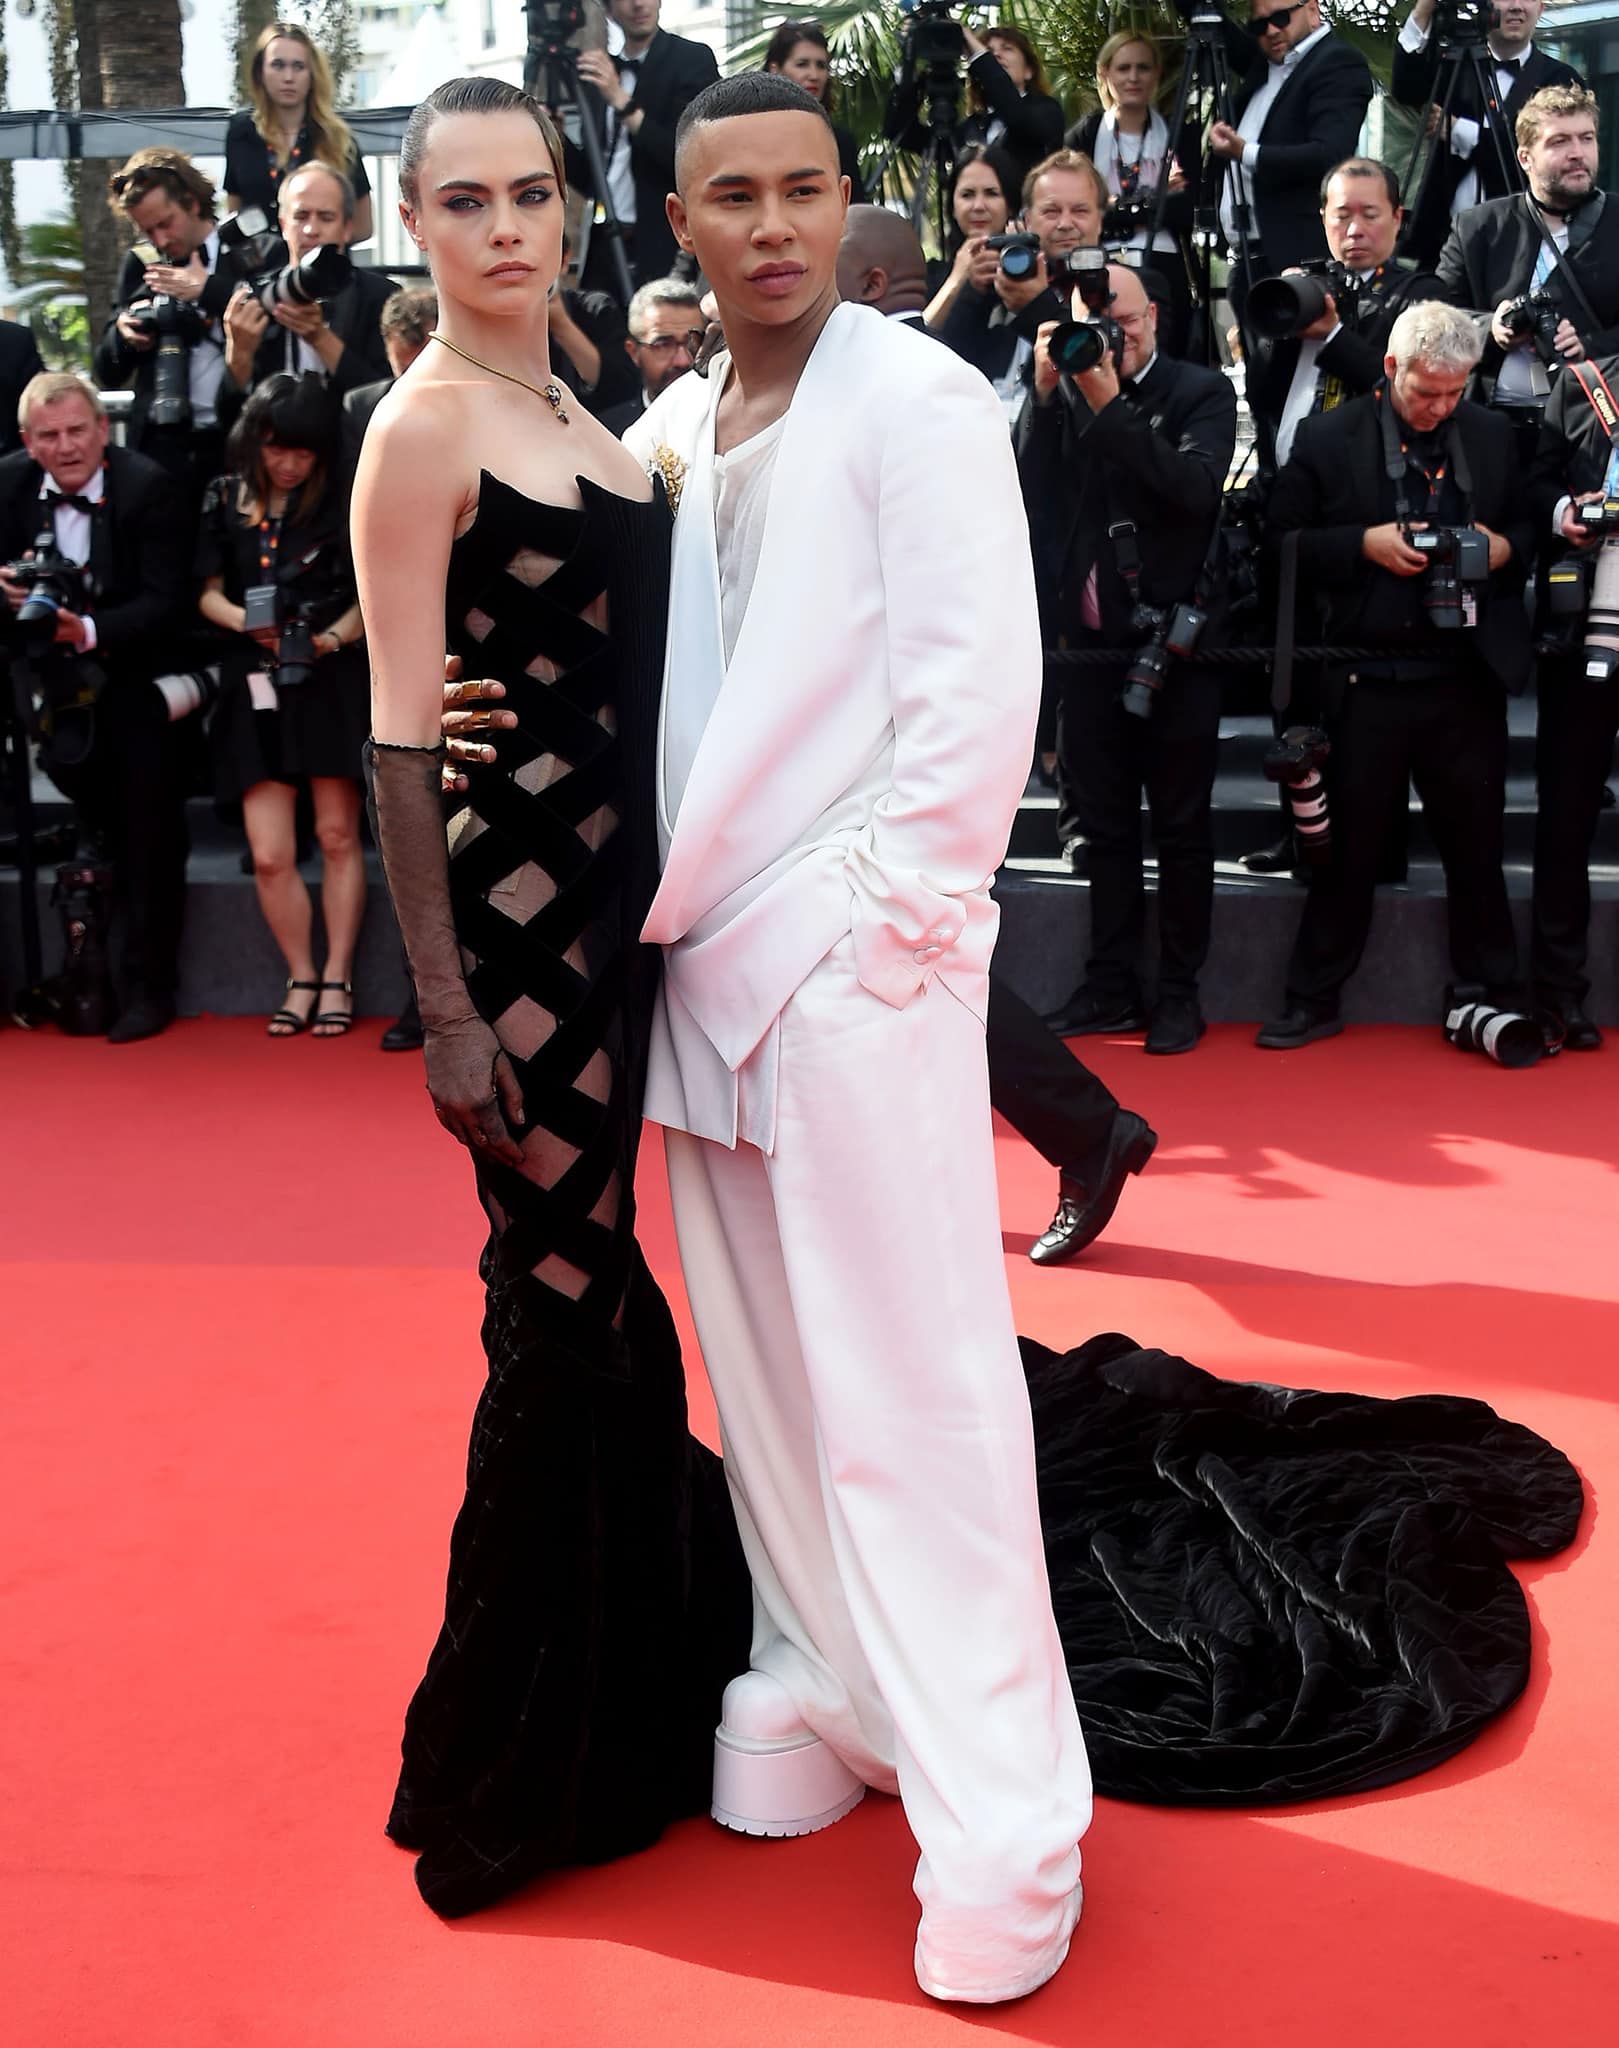 Cara Delevingne pose with Balmain creative director Olivier Rousteing clad in an all-white outfit